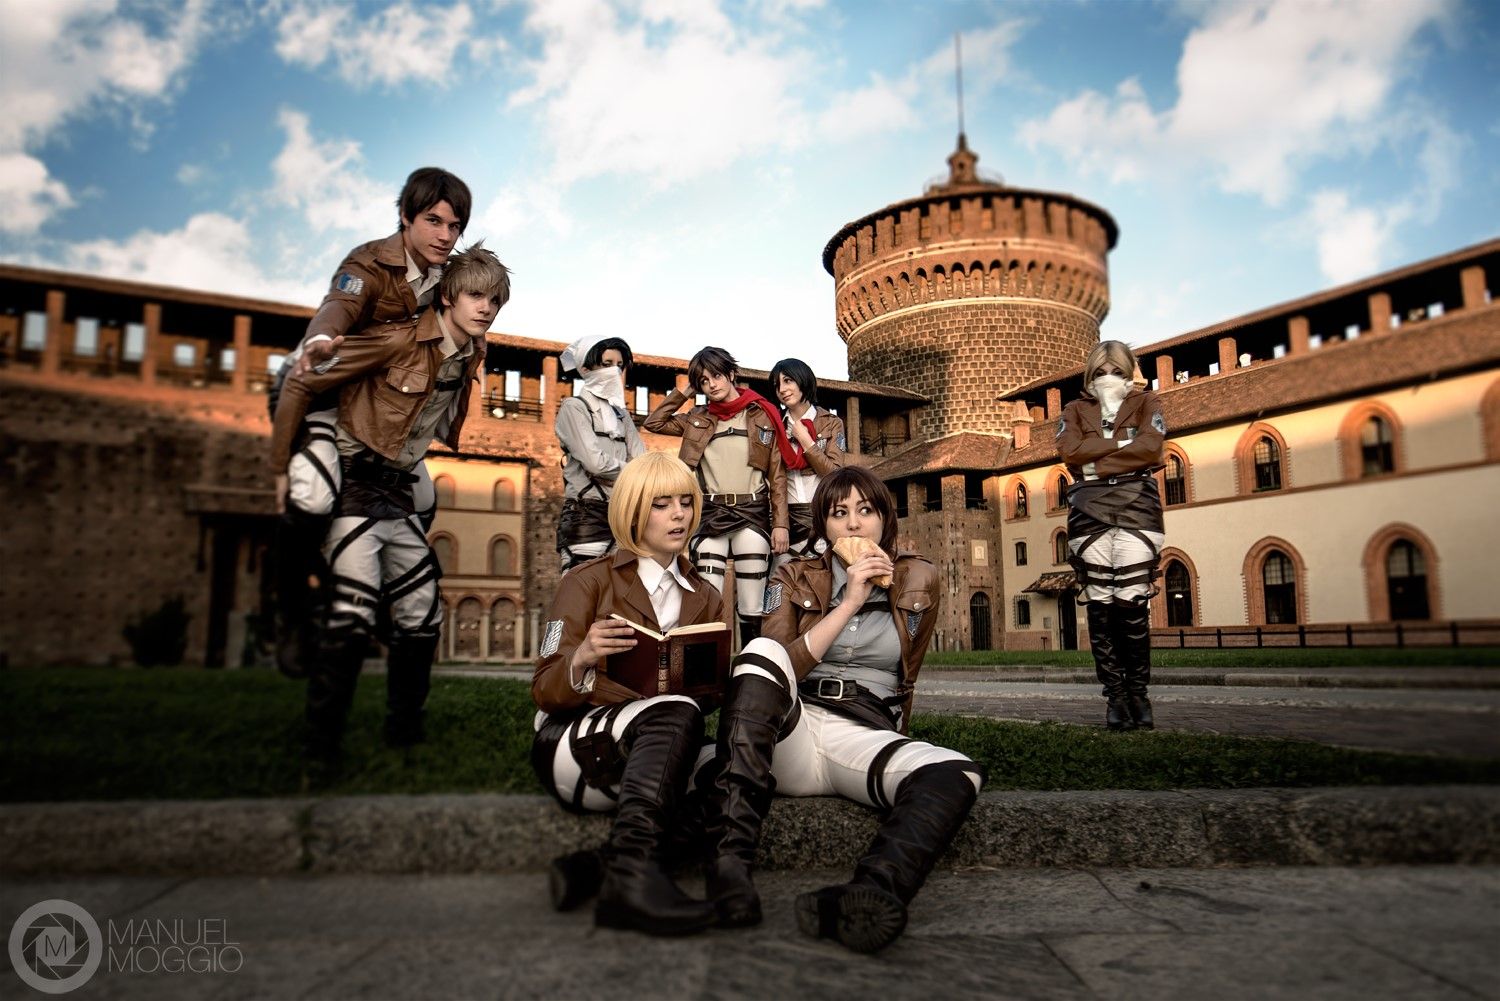 A group cosplay of Attack on Titan characters with Armin sitting at the front.